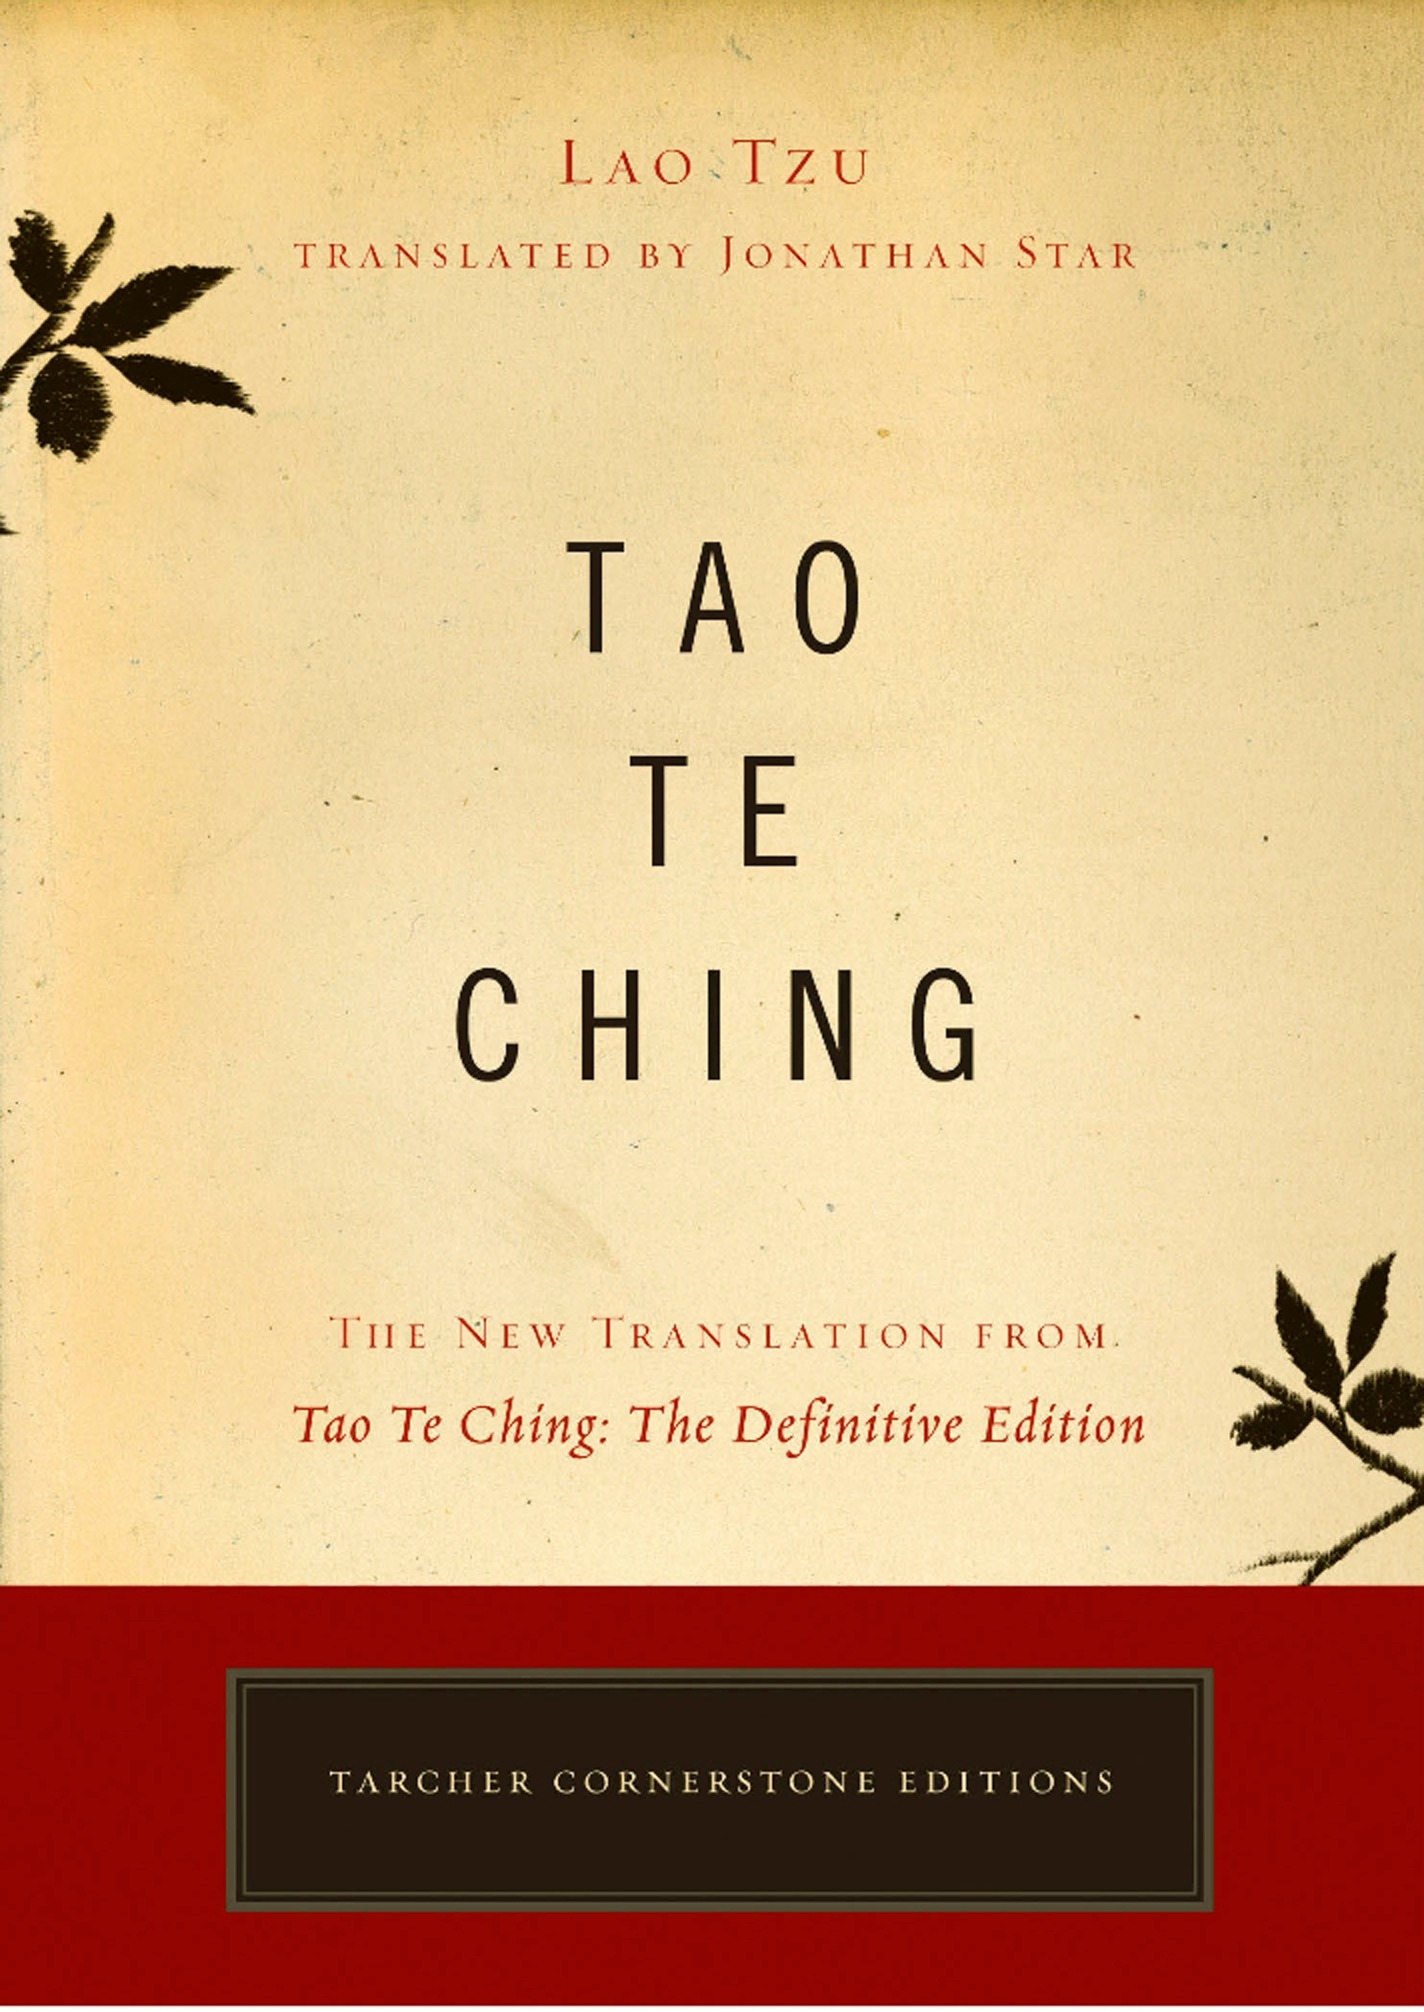 Tao Te Ching: The New Translation from Tao Te Ching: The Definitive